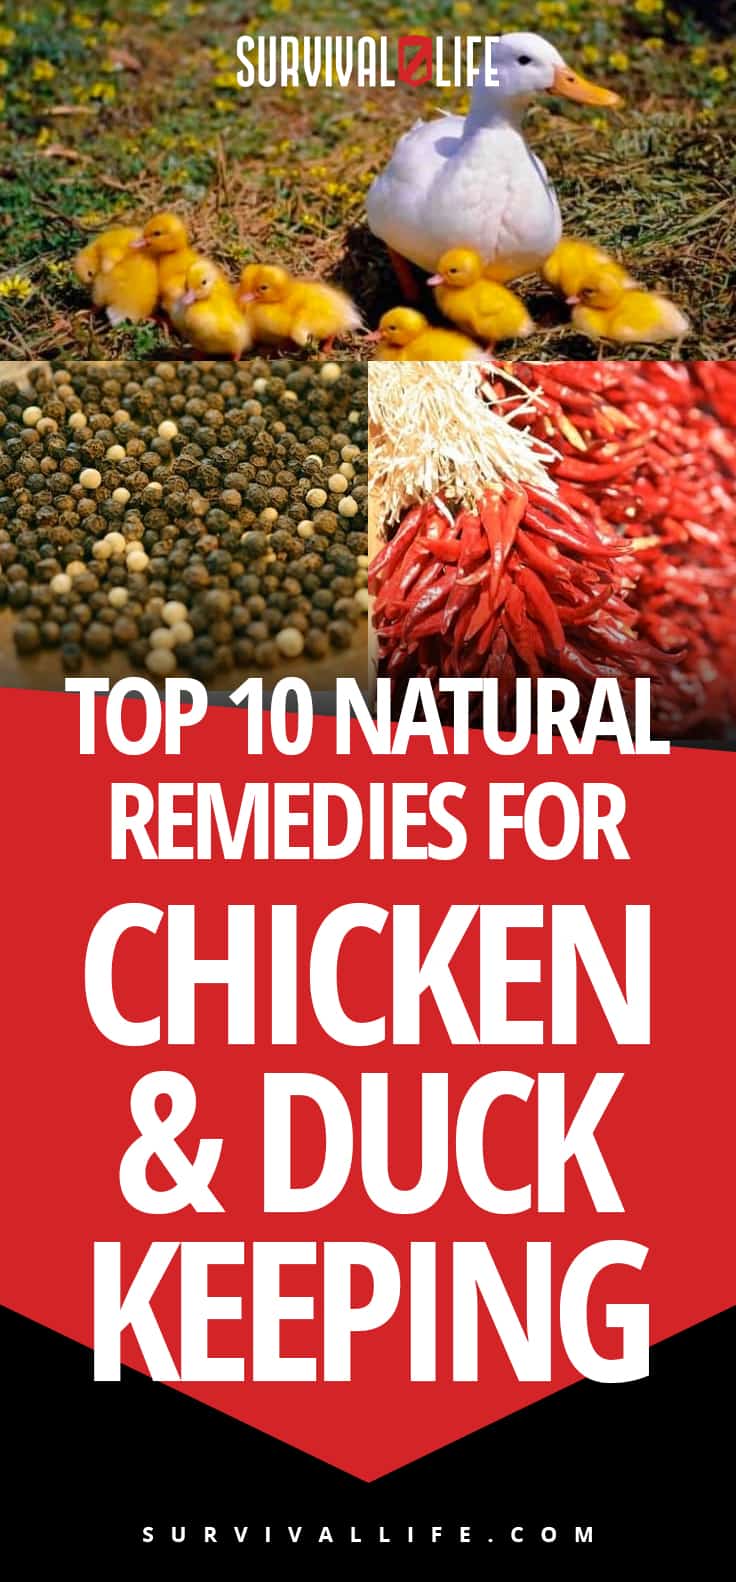 Chicken And Duck Keeping | Top Natural Remedies For Your Sick Flock | https://survivallife.com/chicken-and-duck-keeping/